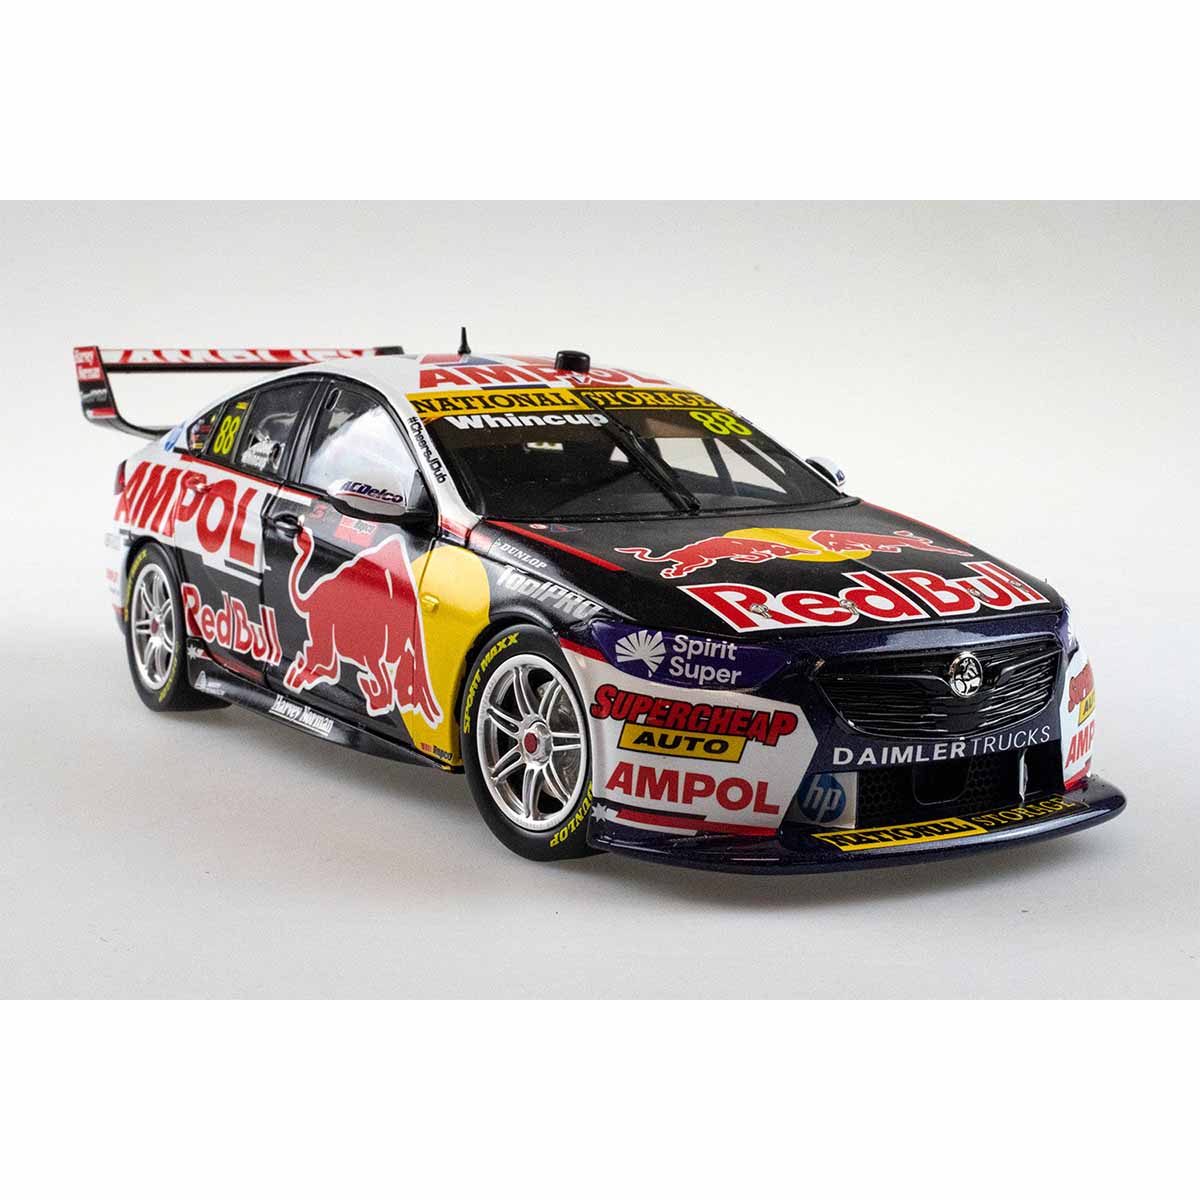 HOLDEN ZB COMMODORE - RED BULL AMPOL RACING - WHINCUP/LOWNDES #88 - REPCO Bathurst 1000 - 1:18 Scale Diecast Model Car